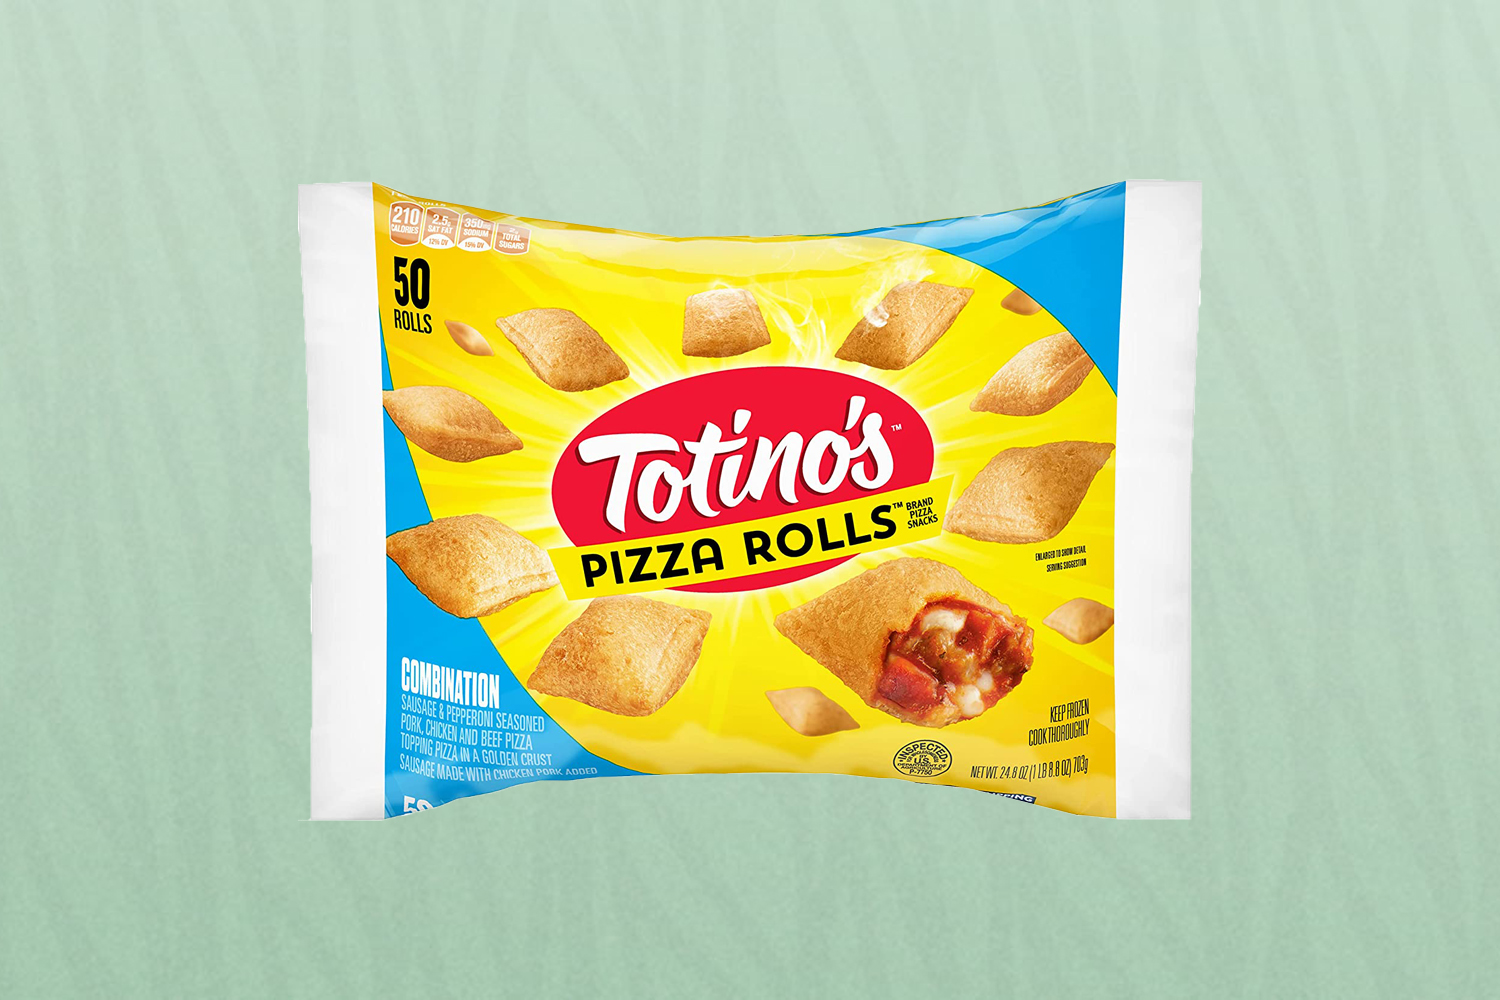 Totino's Pizza Rolls are one of the best snacks to eat when you're stoned in 2022 because they are filling, savory and taste like pizza